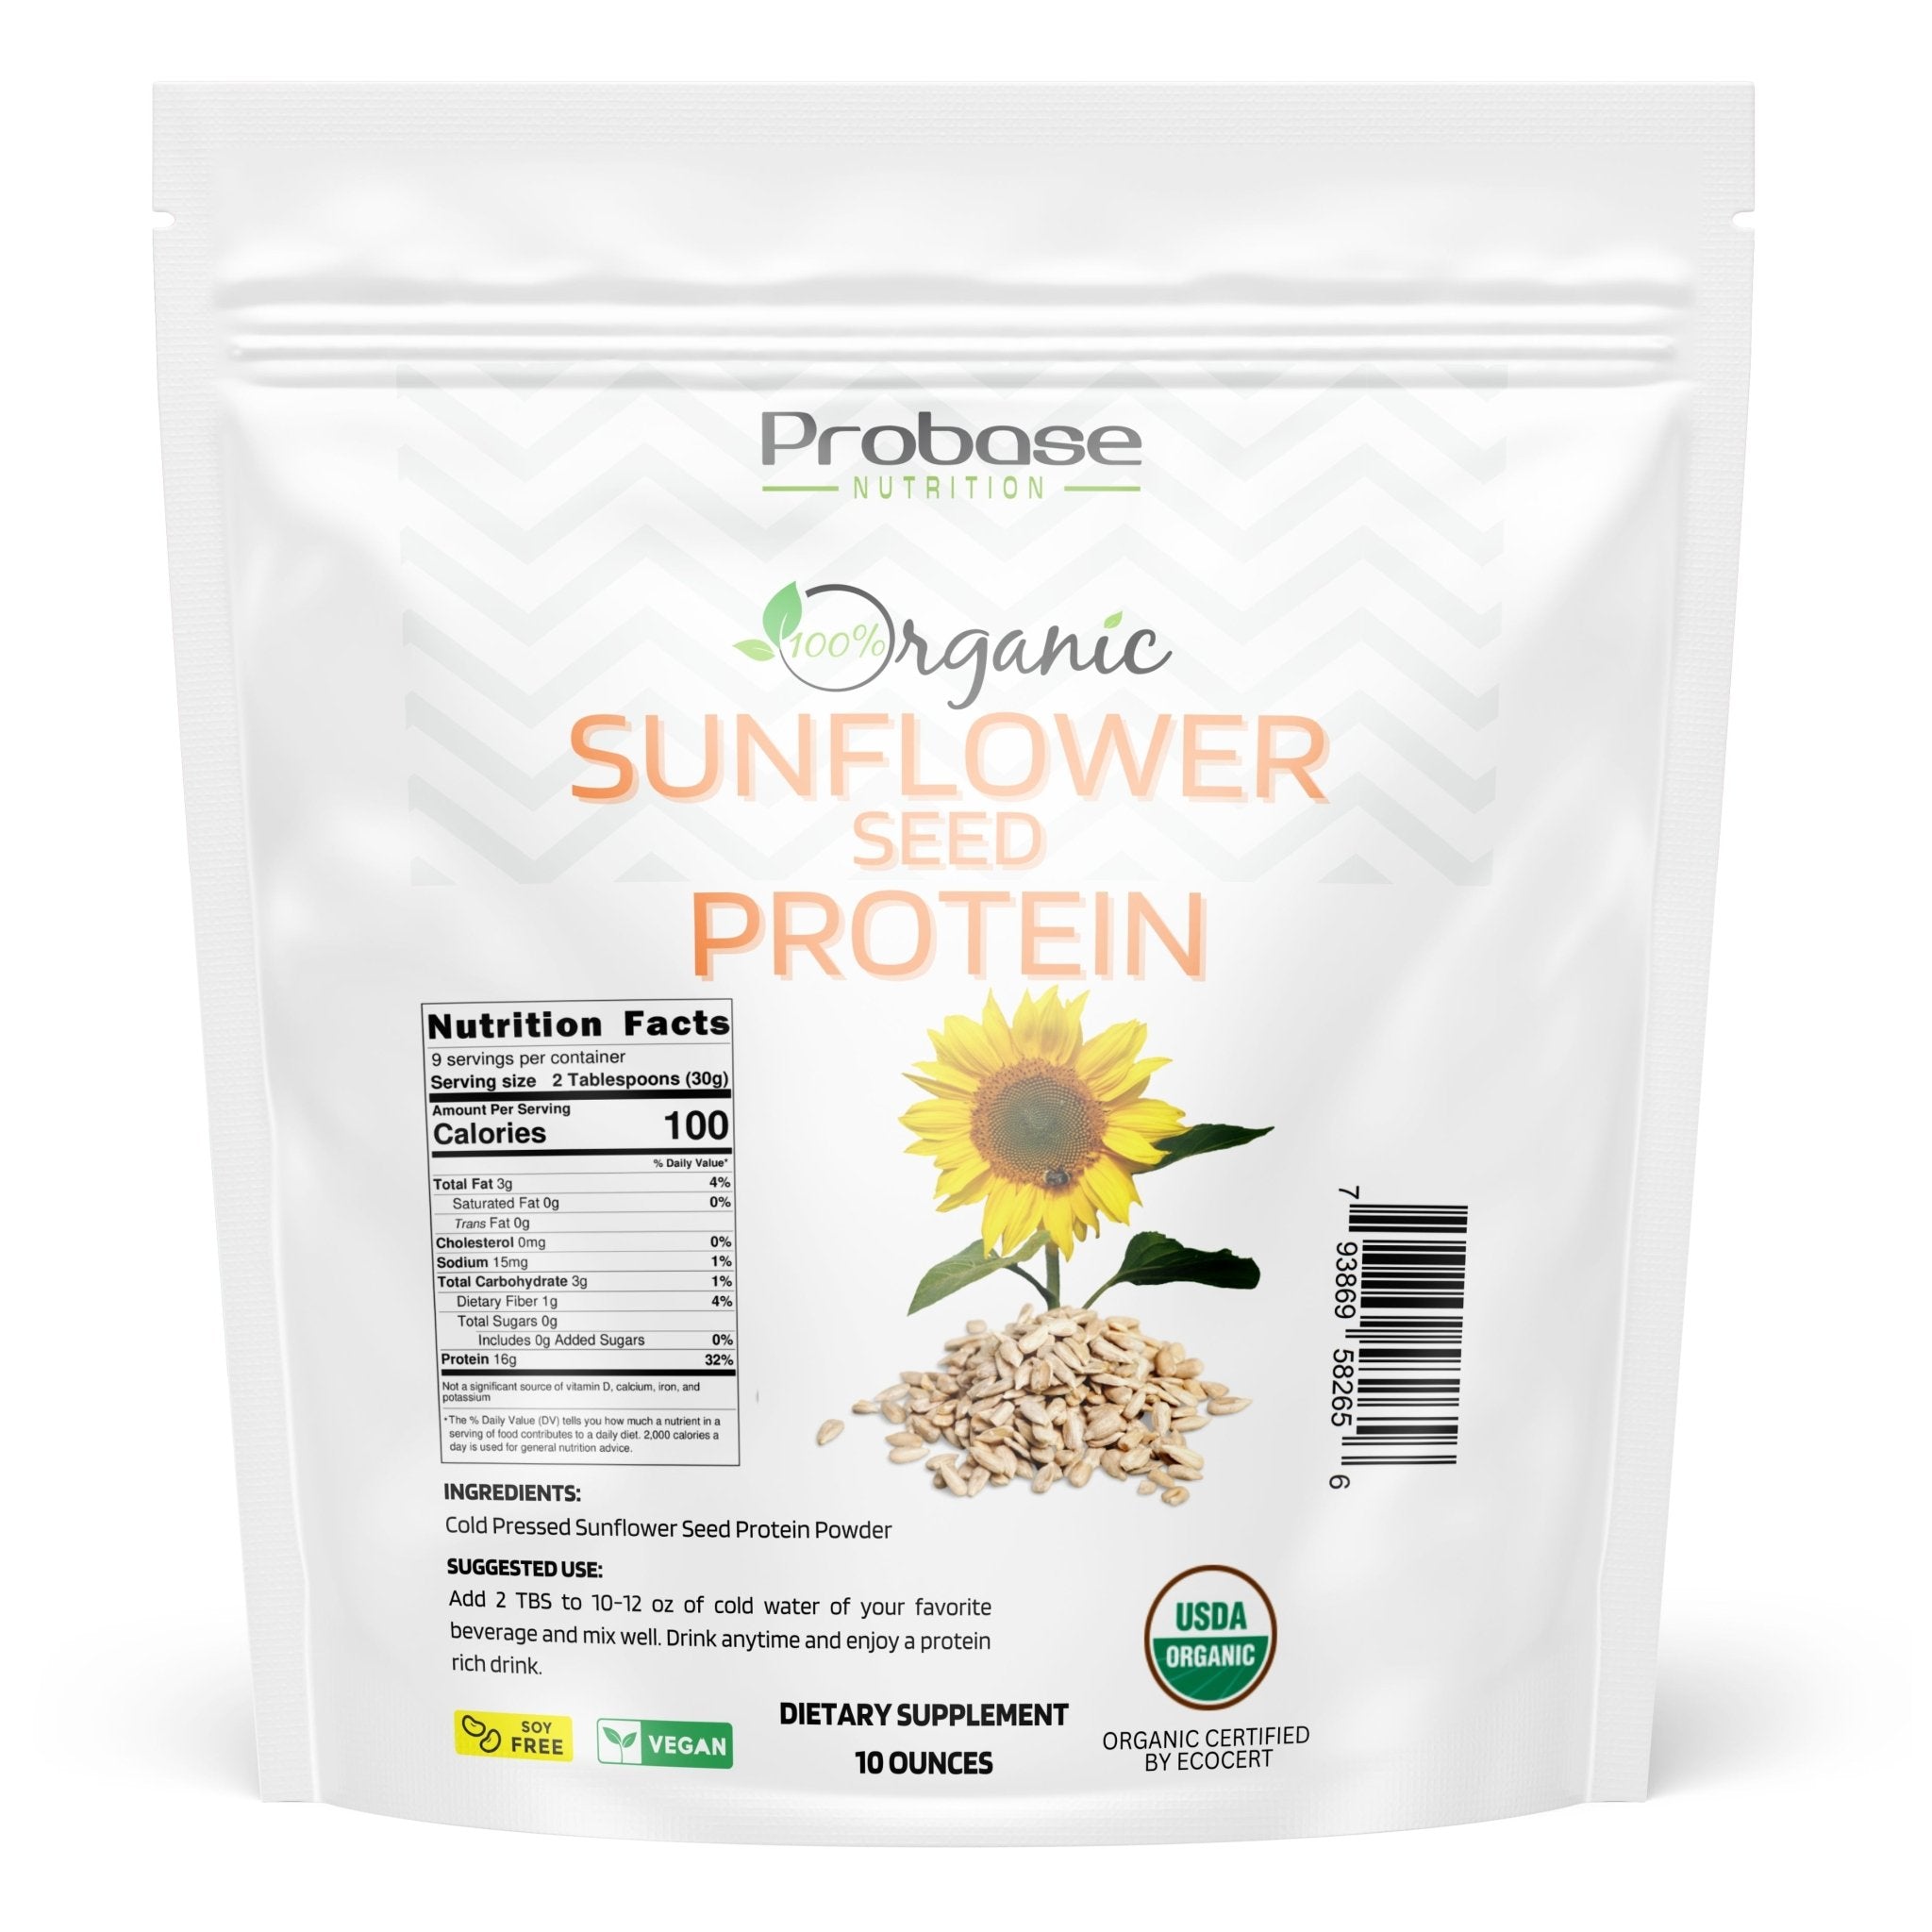 Fuel Your Body with Probase Nutrition Organic Sunflower Seed Protein Powder: A Complete Protein Source That's Versatile, Sustainable, and Free from Fillers and Gums! - Probase Nutrition